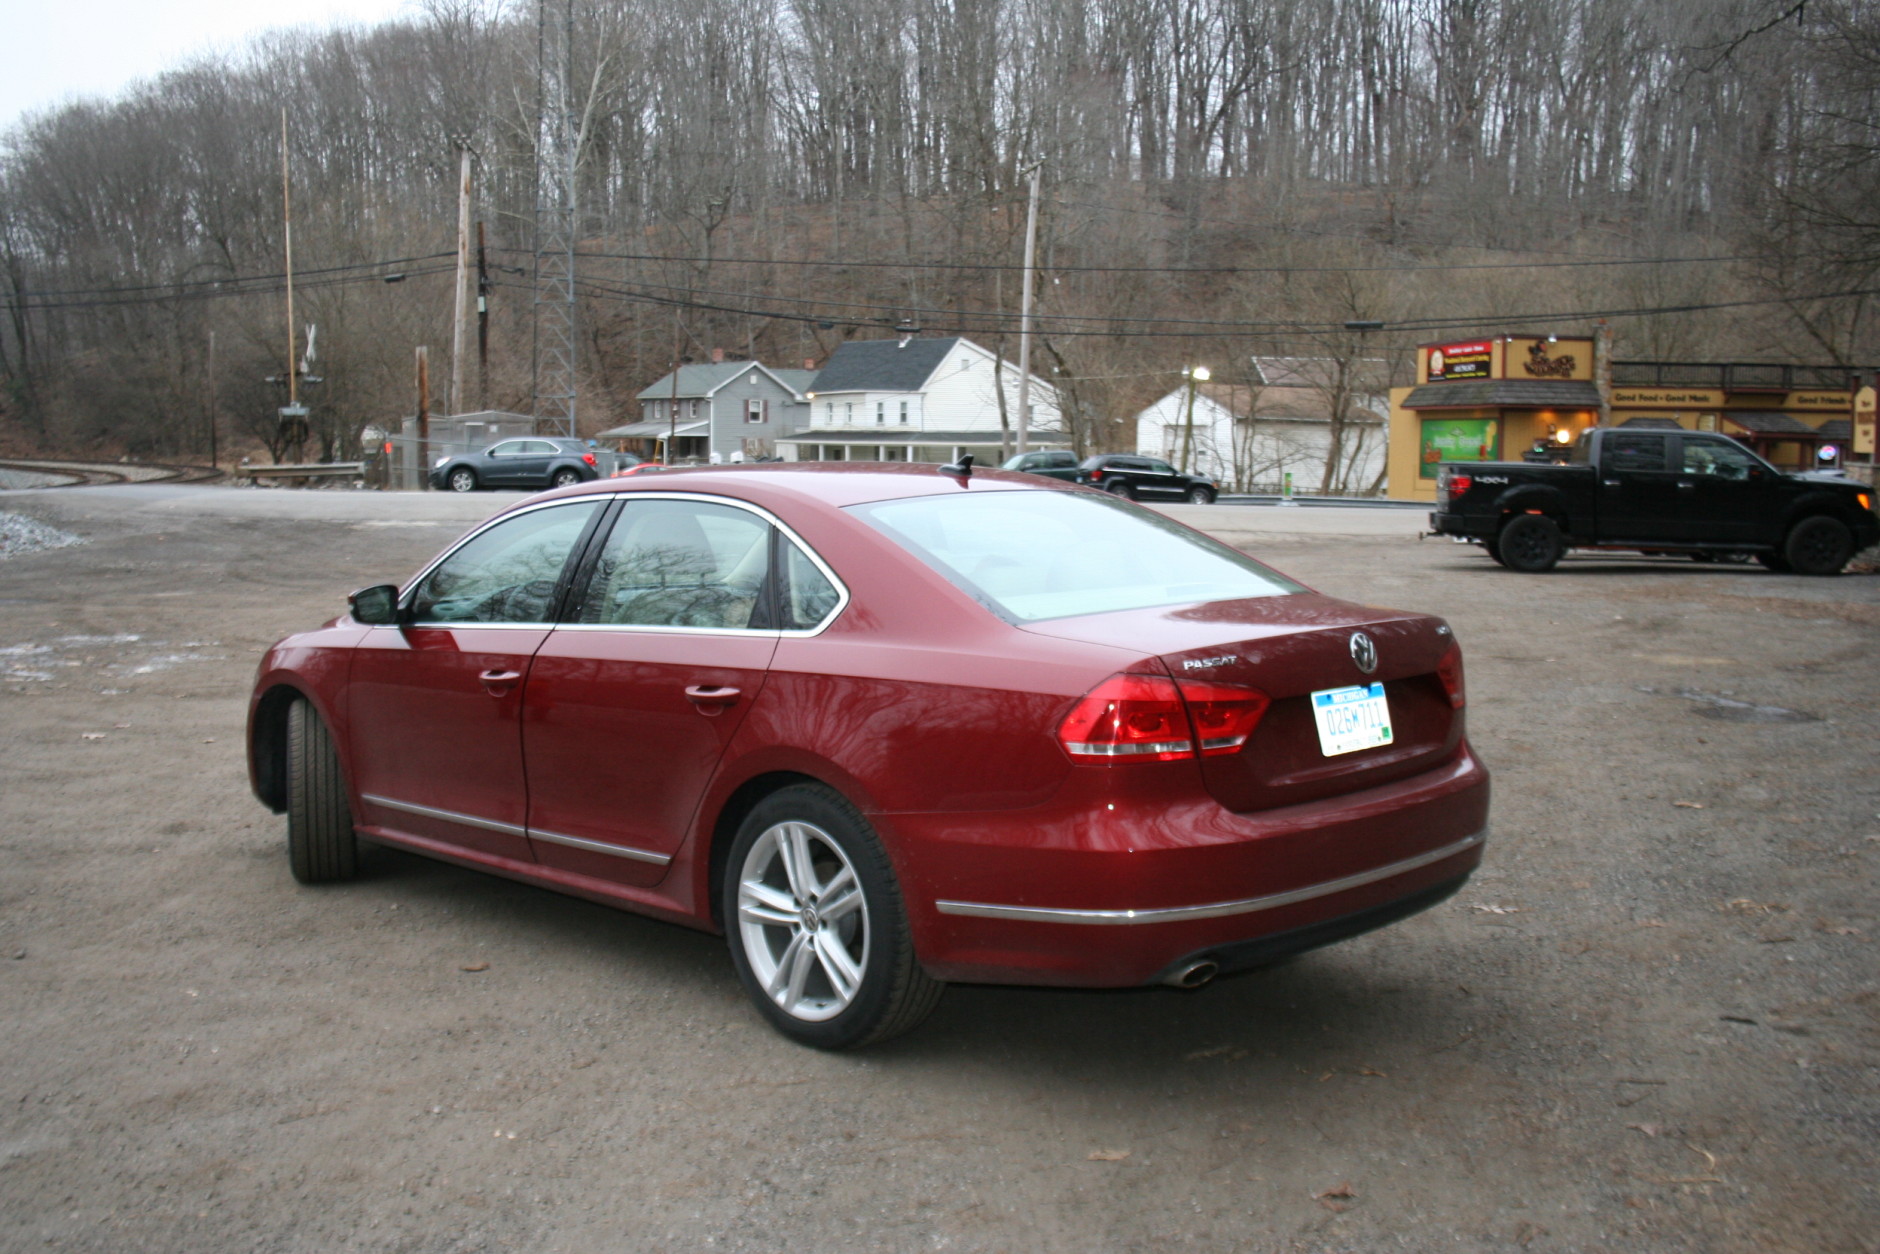 The Fortana red color is not what you expect to see on the Passat, but it really suits this car. (WTOP/Mike Parris)